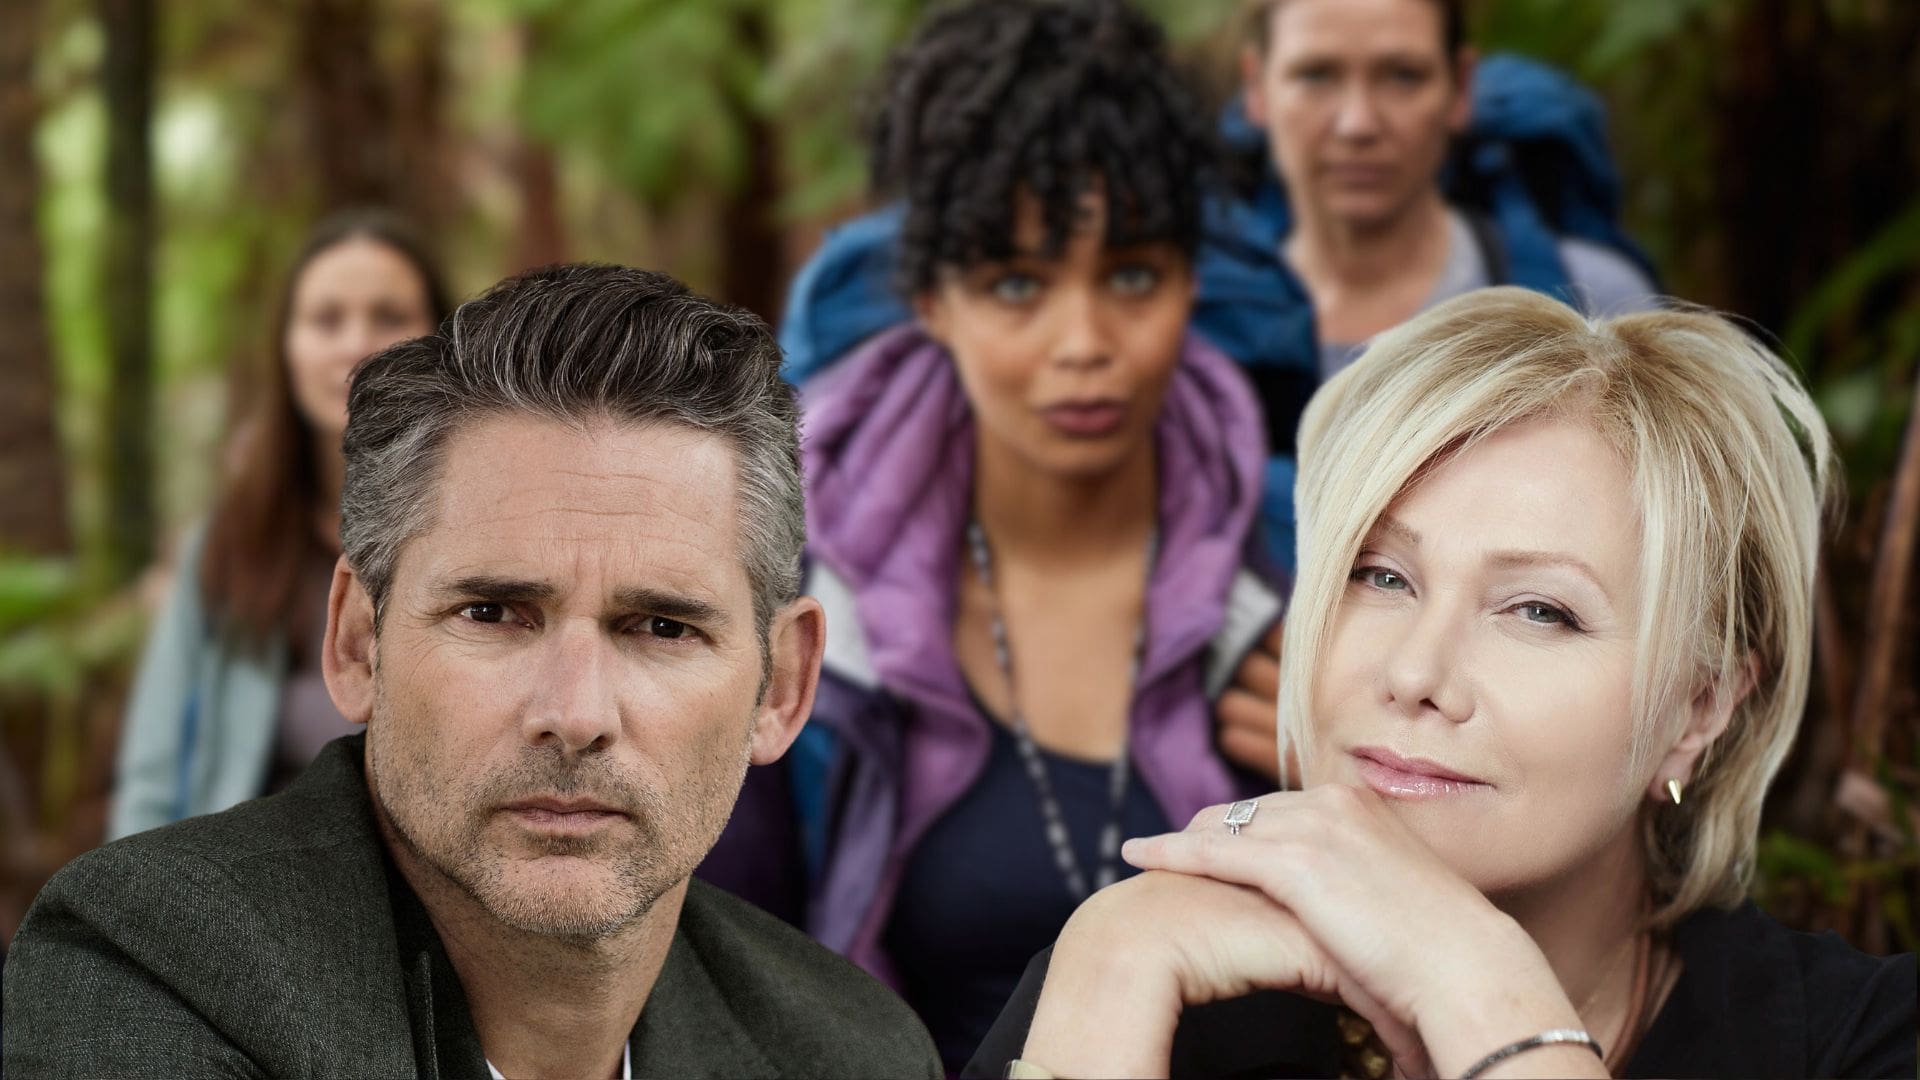 For Your Reference - Interview with “Force of Nature: The Dry 2” Actors, Eric Bana and Deborra-lee Furness